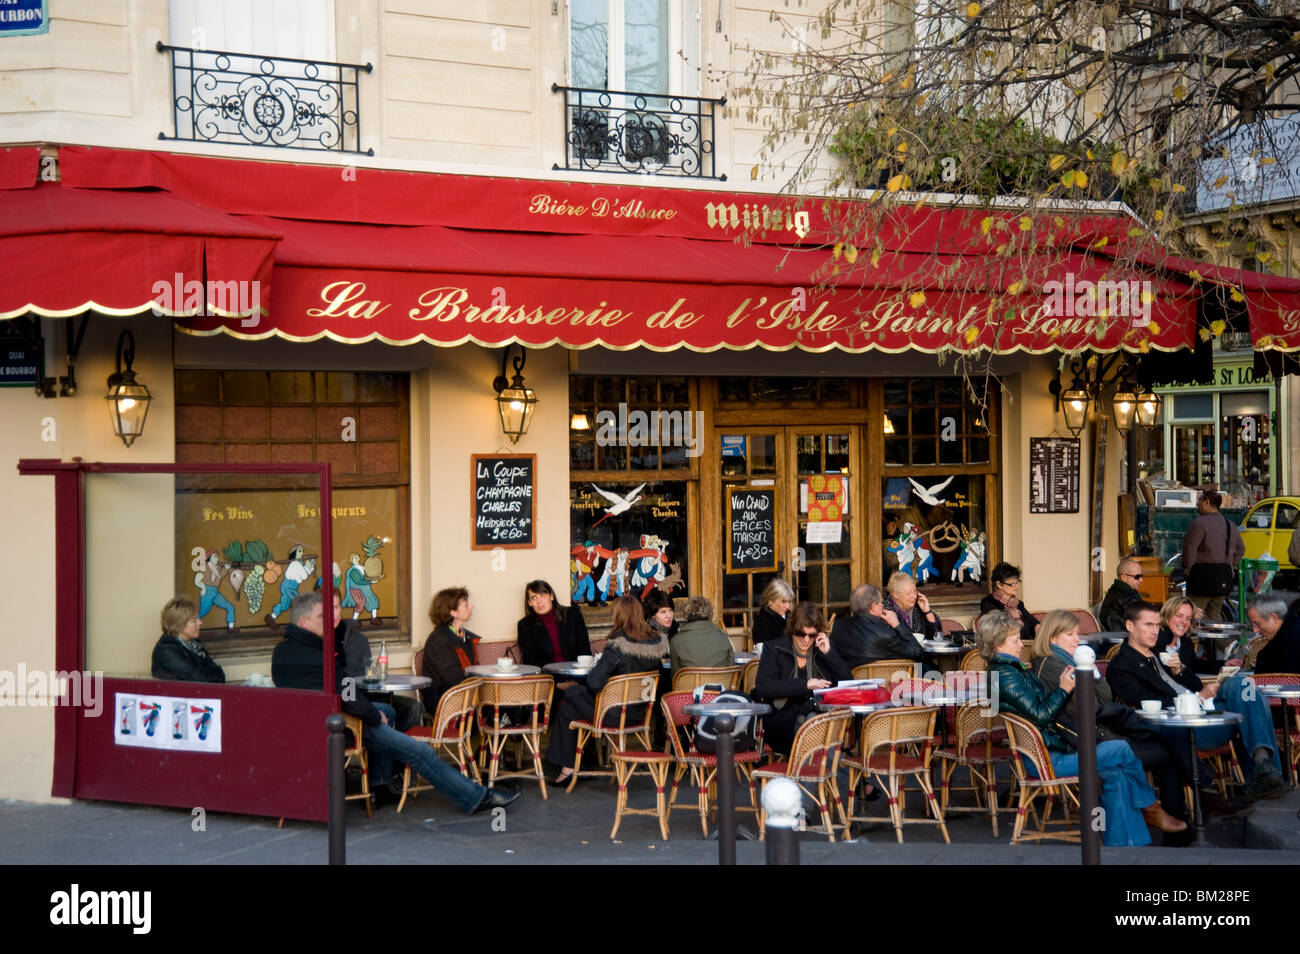 People sitting outside a Brasserie on the Ile St. Louis, Paris, France Stock Photo